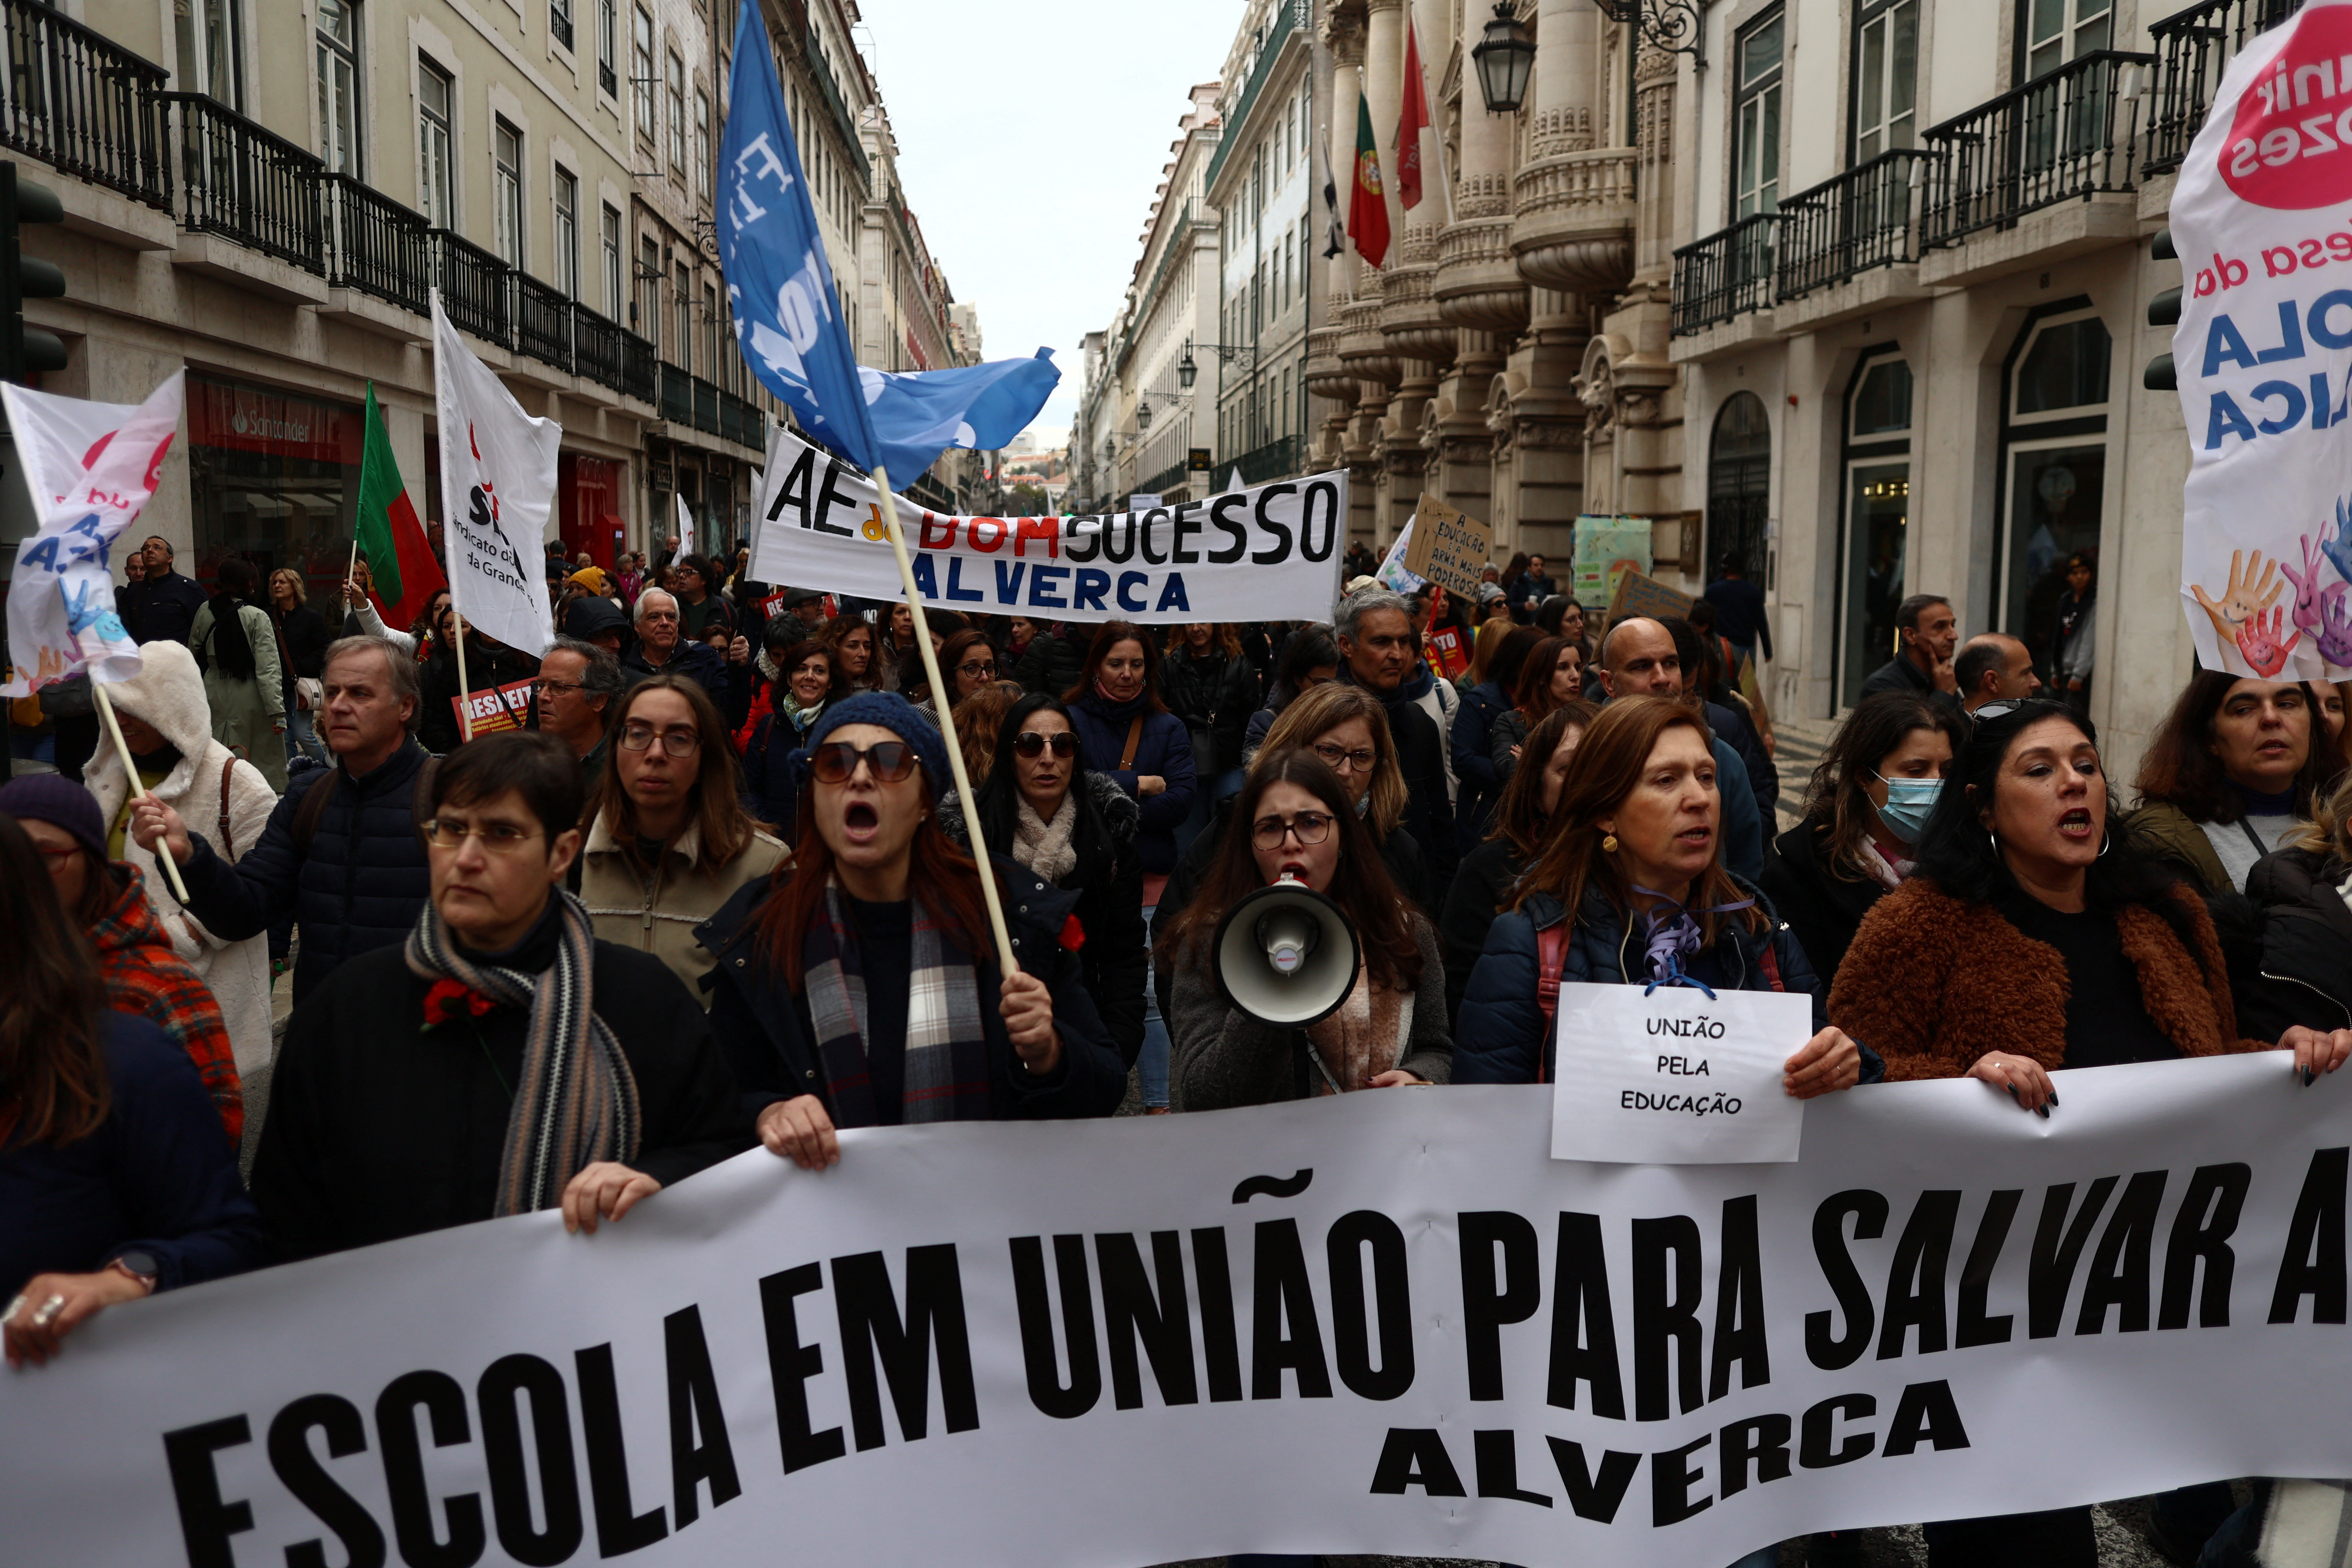 School teachers demonstrate for better salaries and working conditions in Lisbon